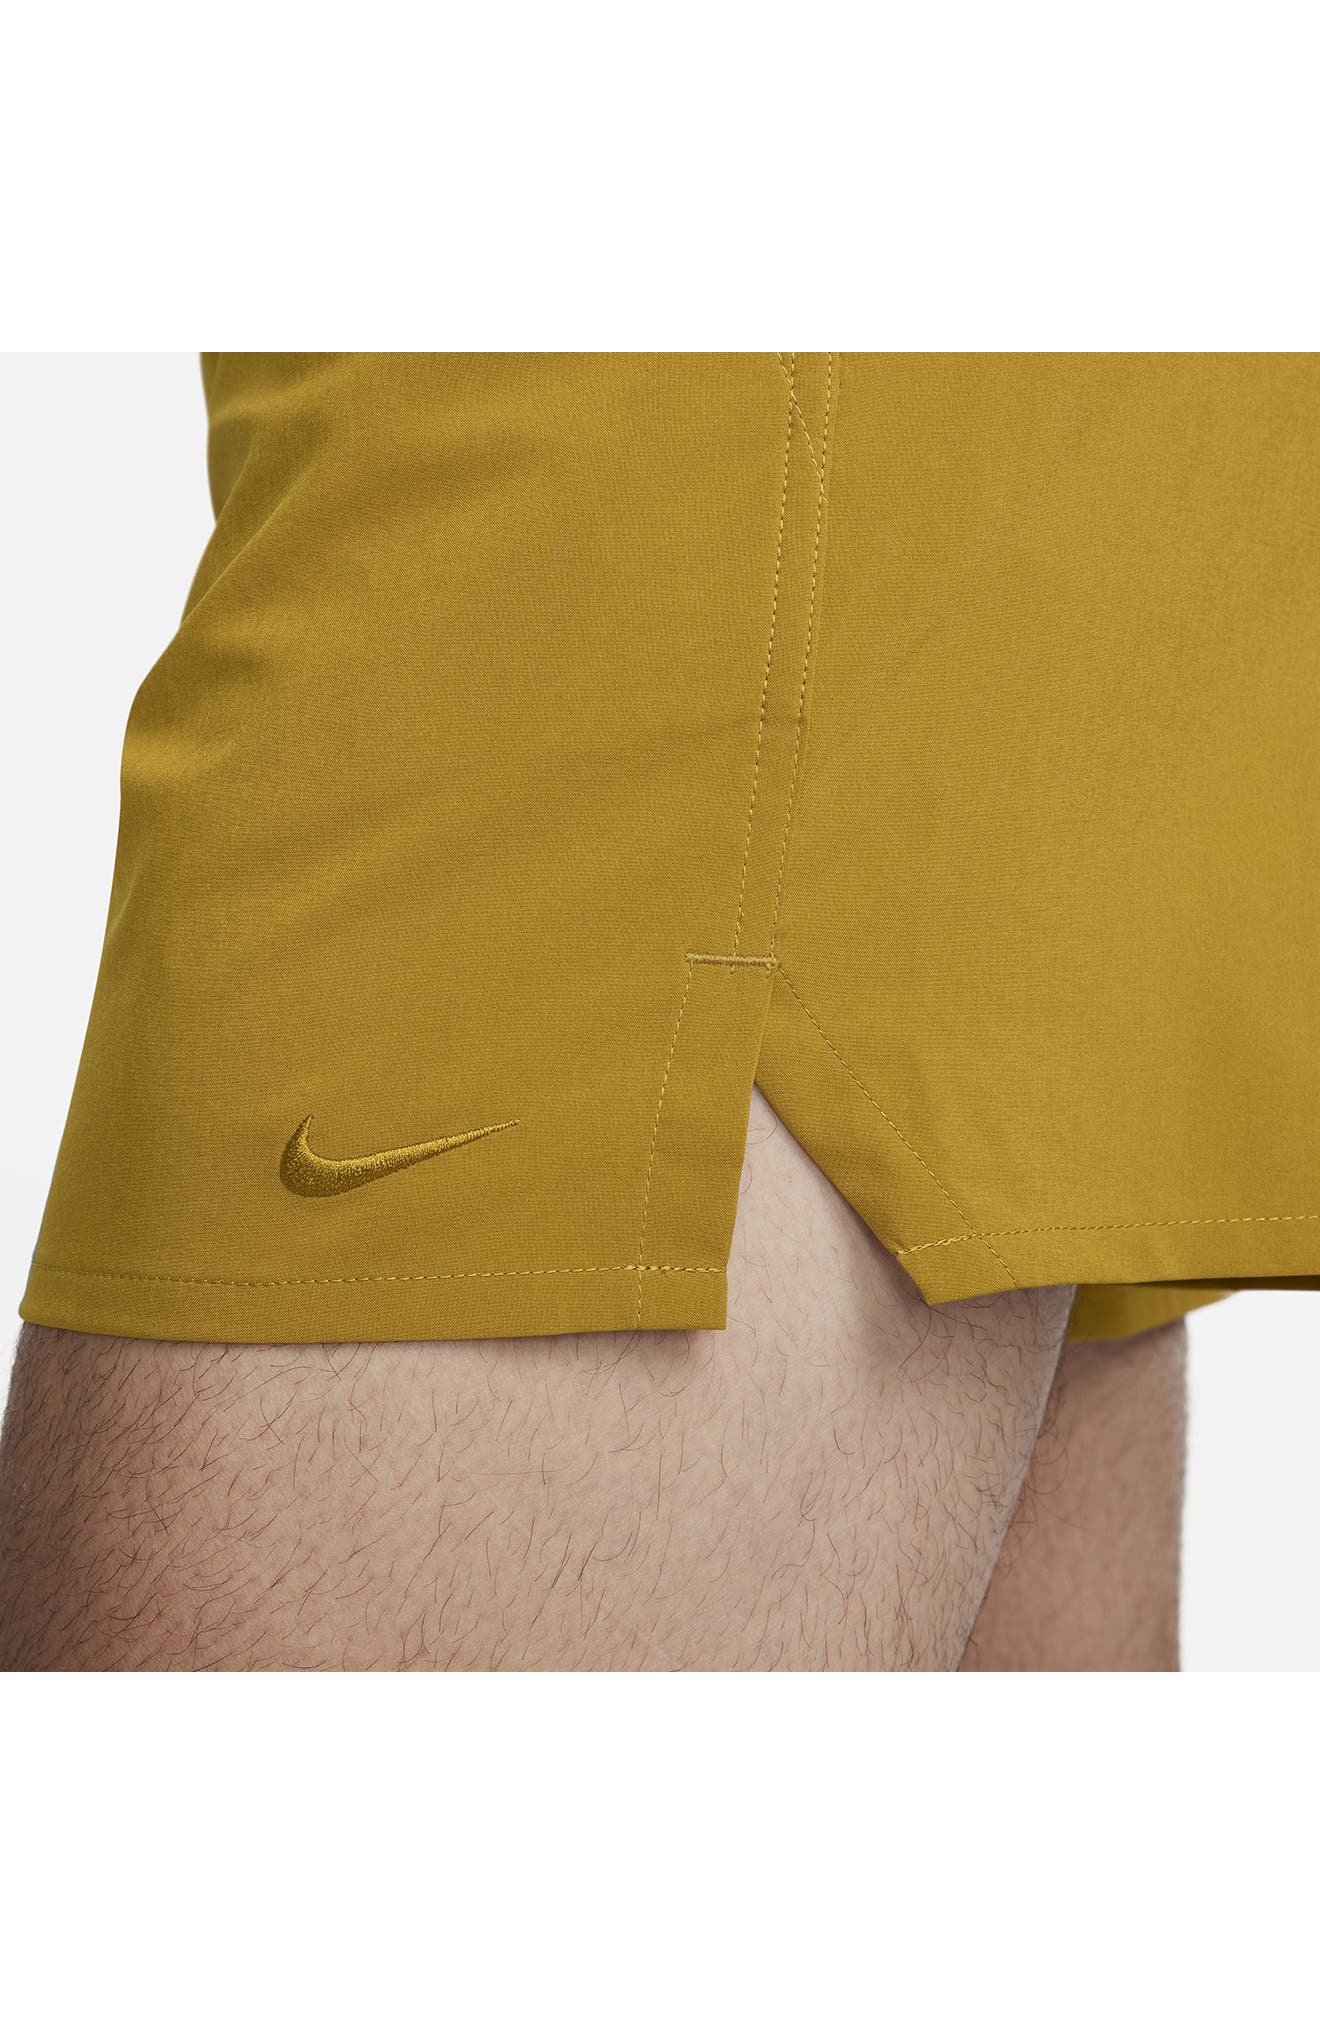 Nike Dri-Fit Unlimited 5-Inch Athletic Shorts